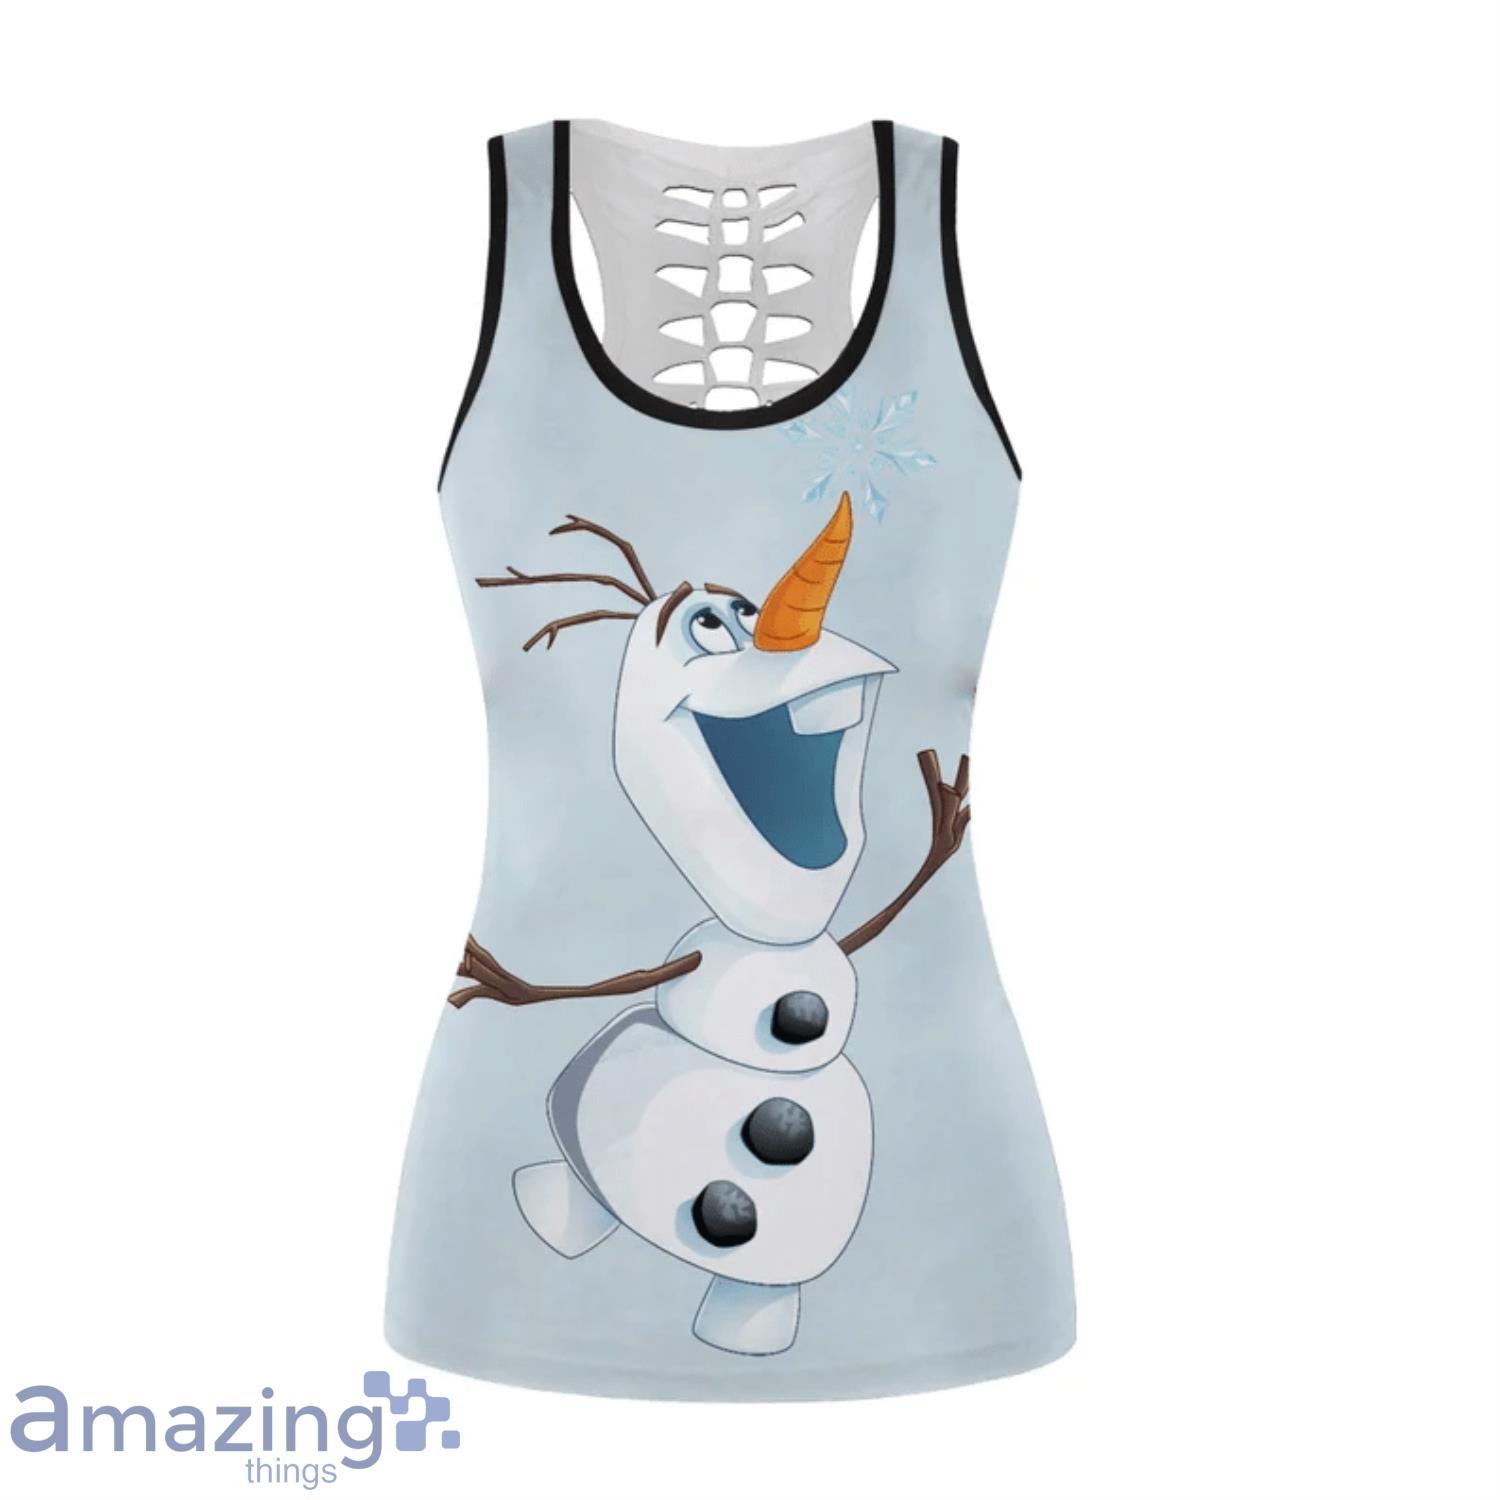 disney frozen olaf images to print